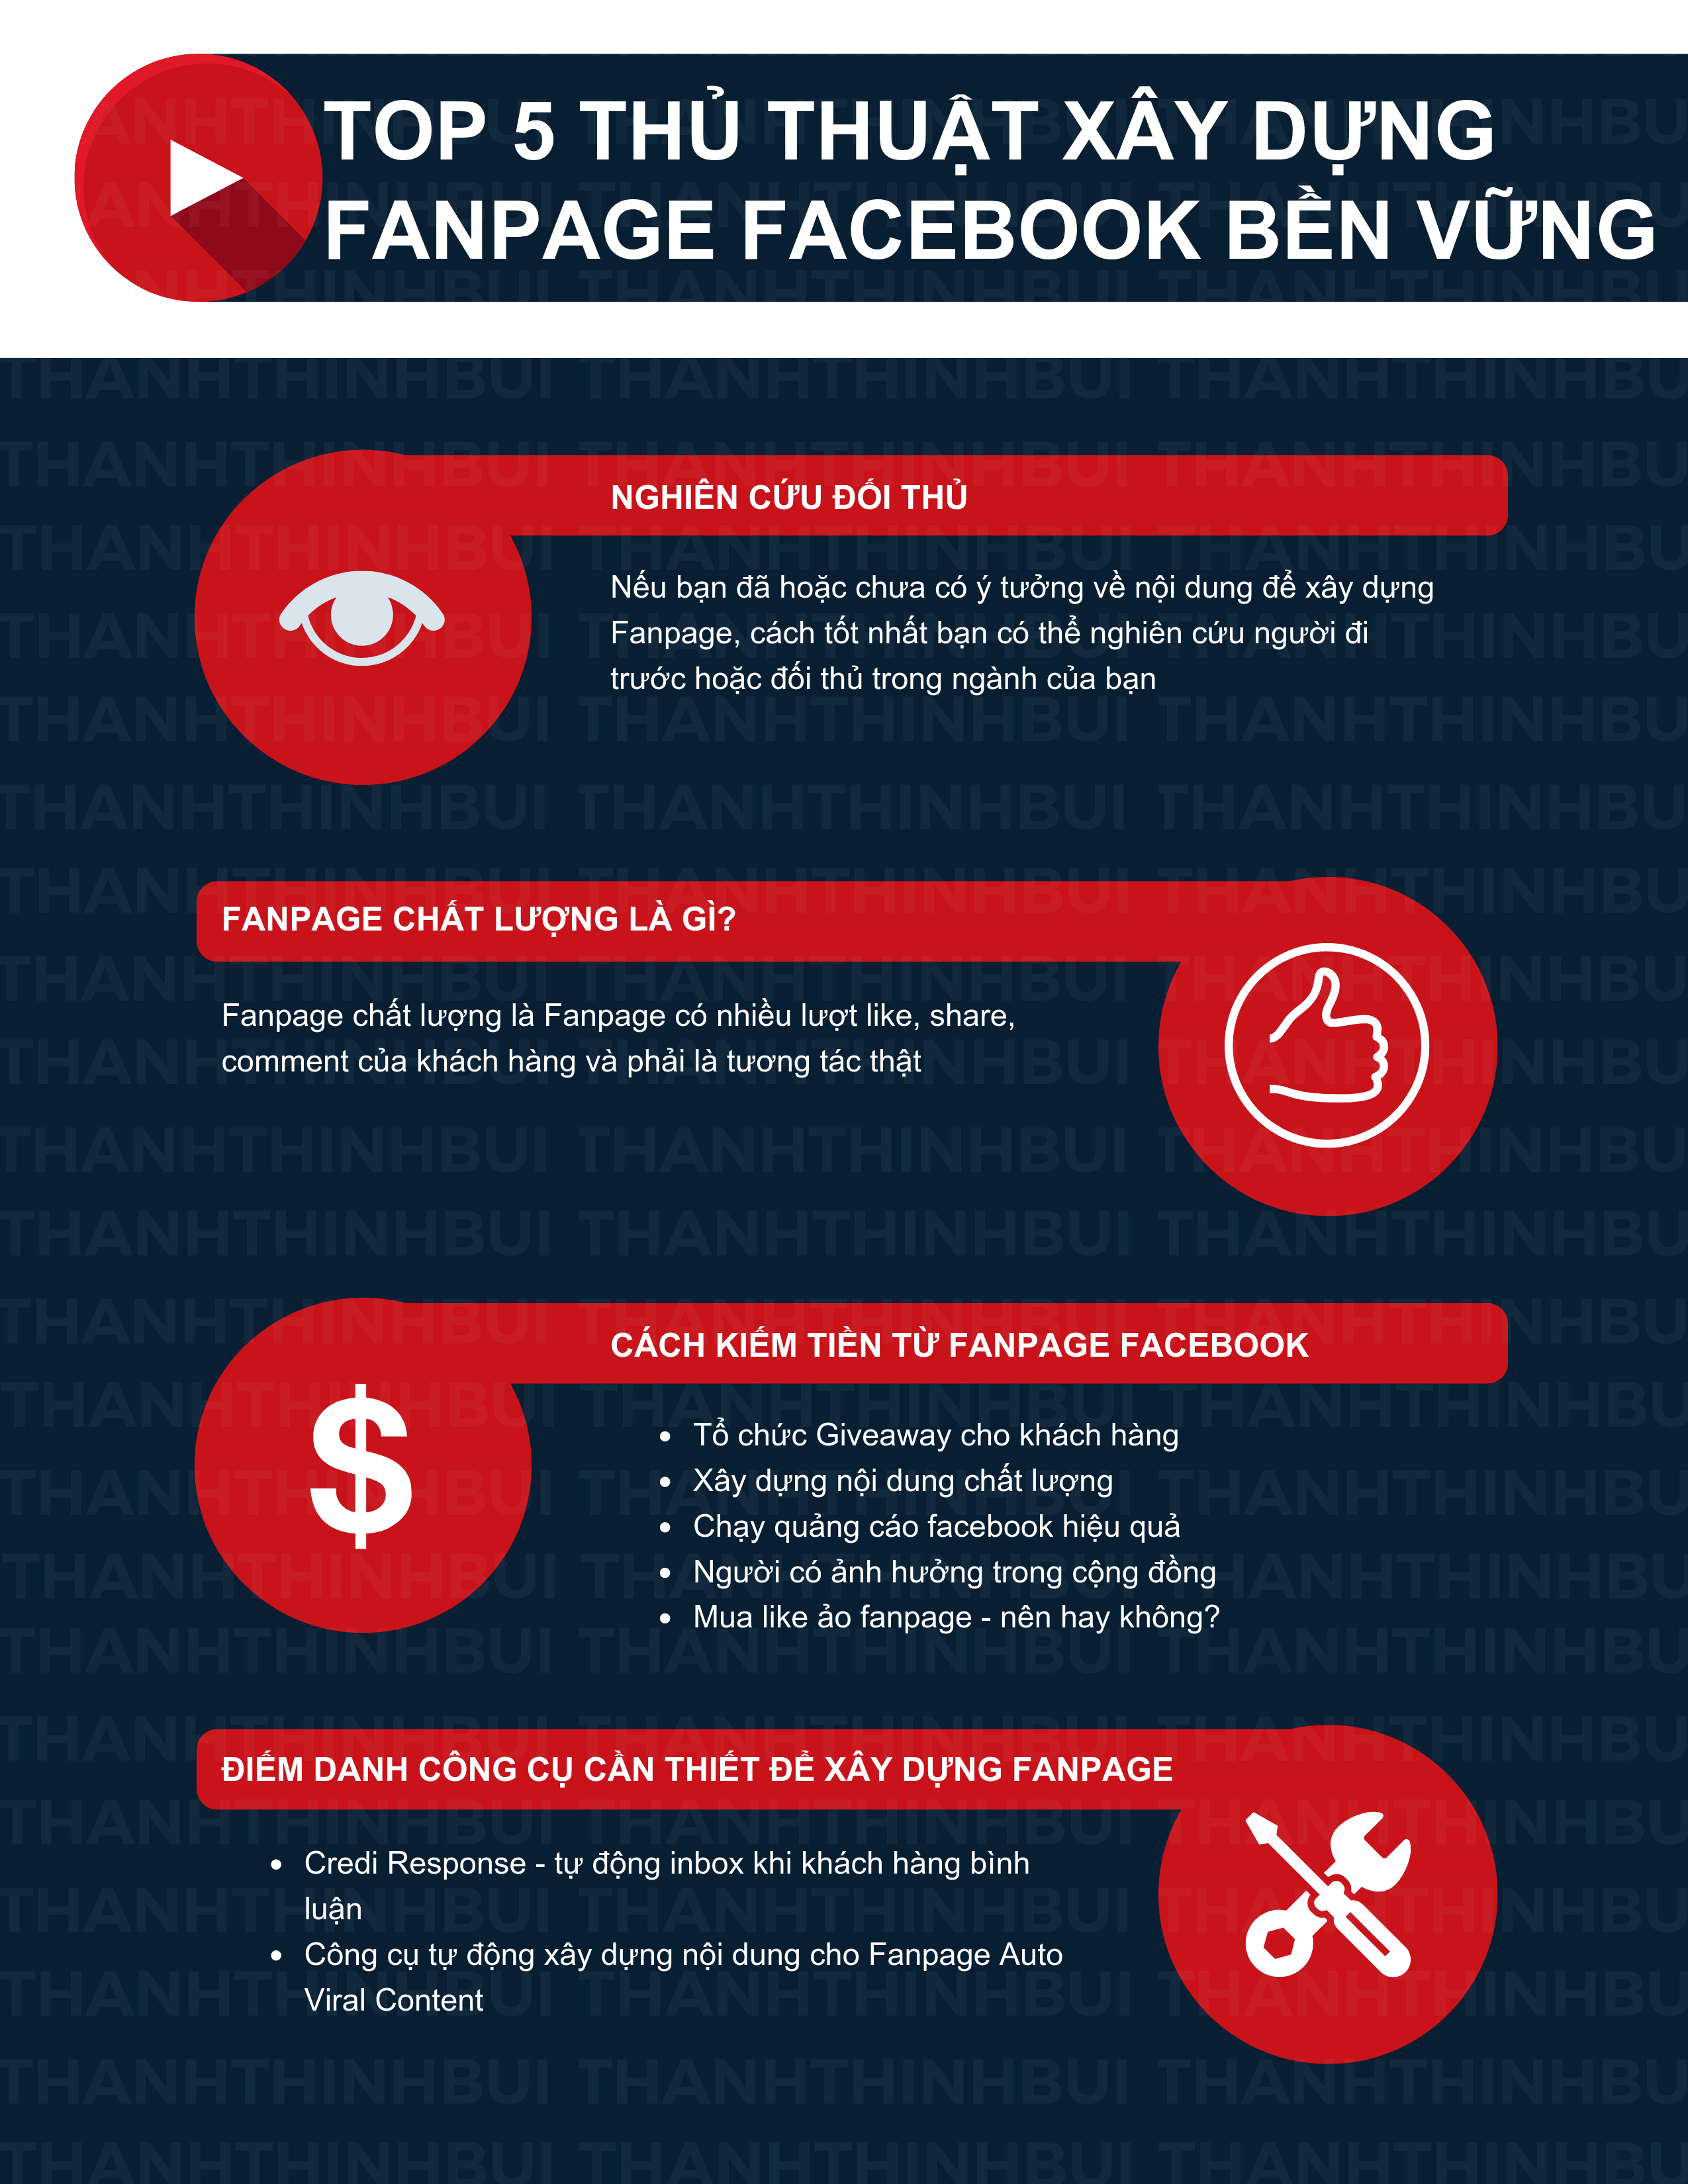 xay-dung-fanpage-infographic